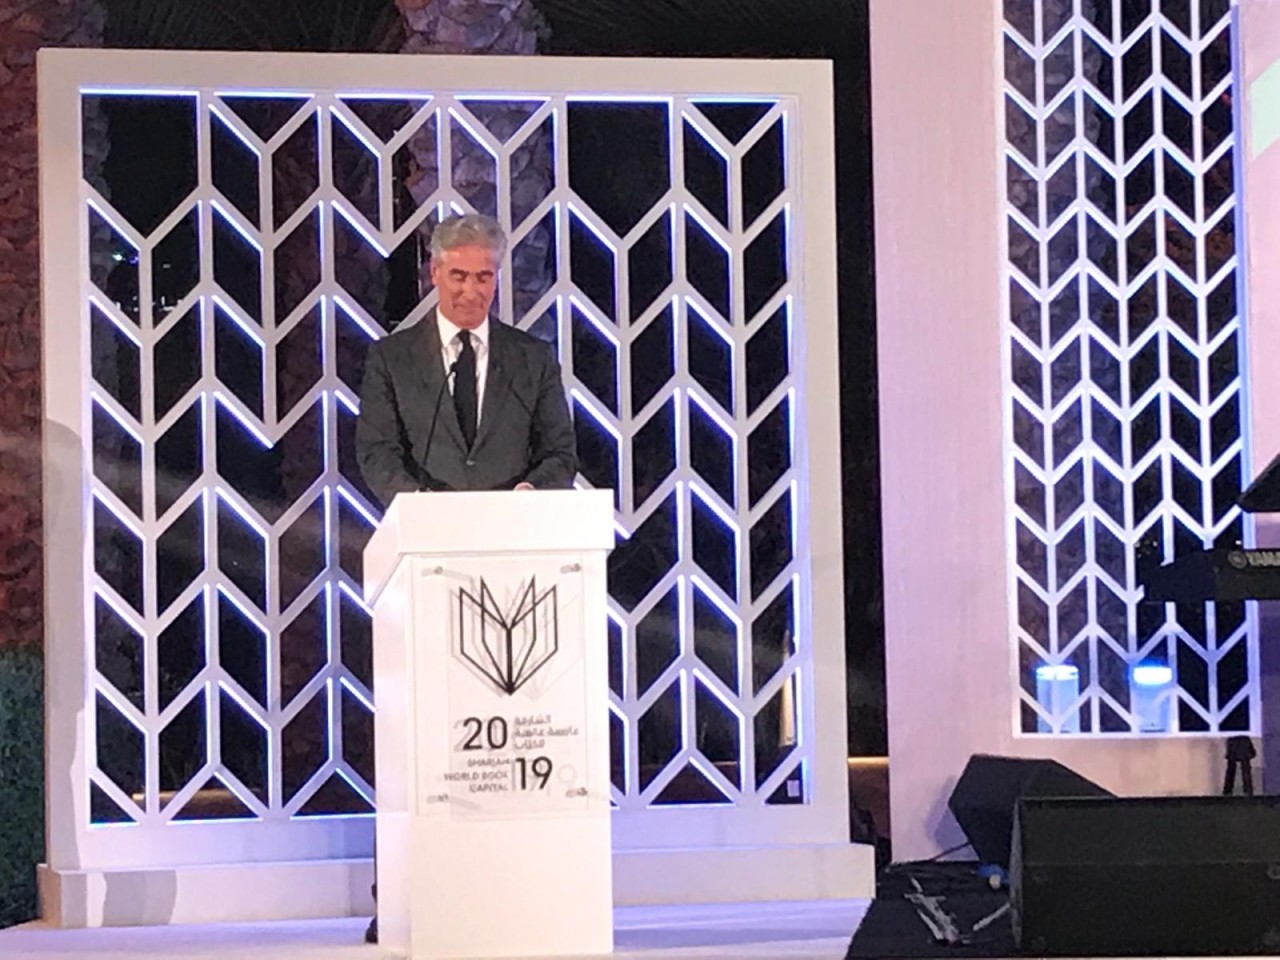 IFLA Secretary-General Gerald Leitner speaking at a dinner ahead of the opening of Sharjah, World Book Capital 2019